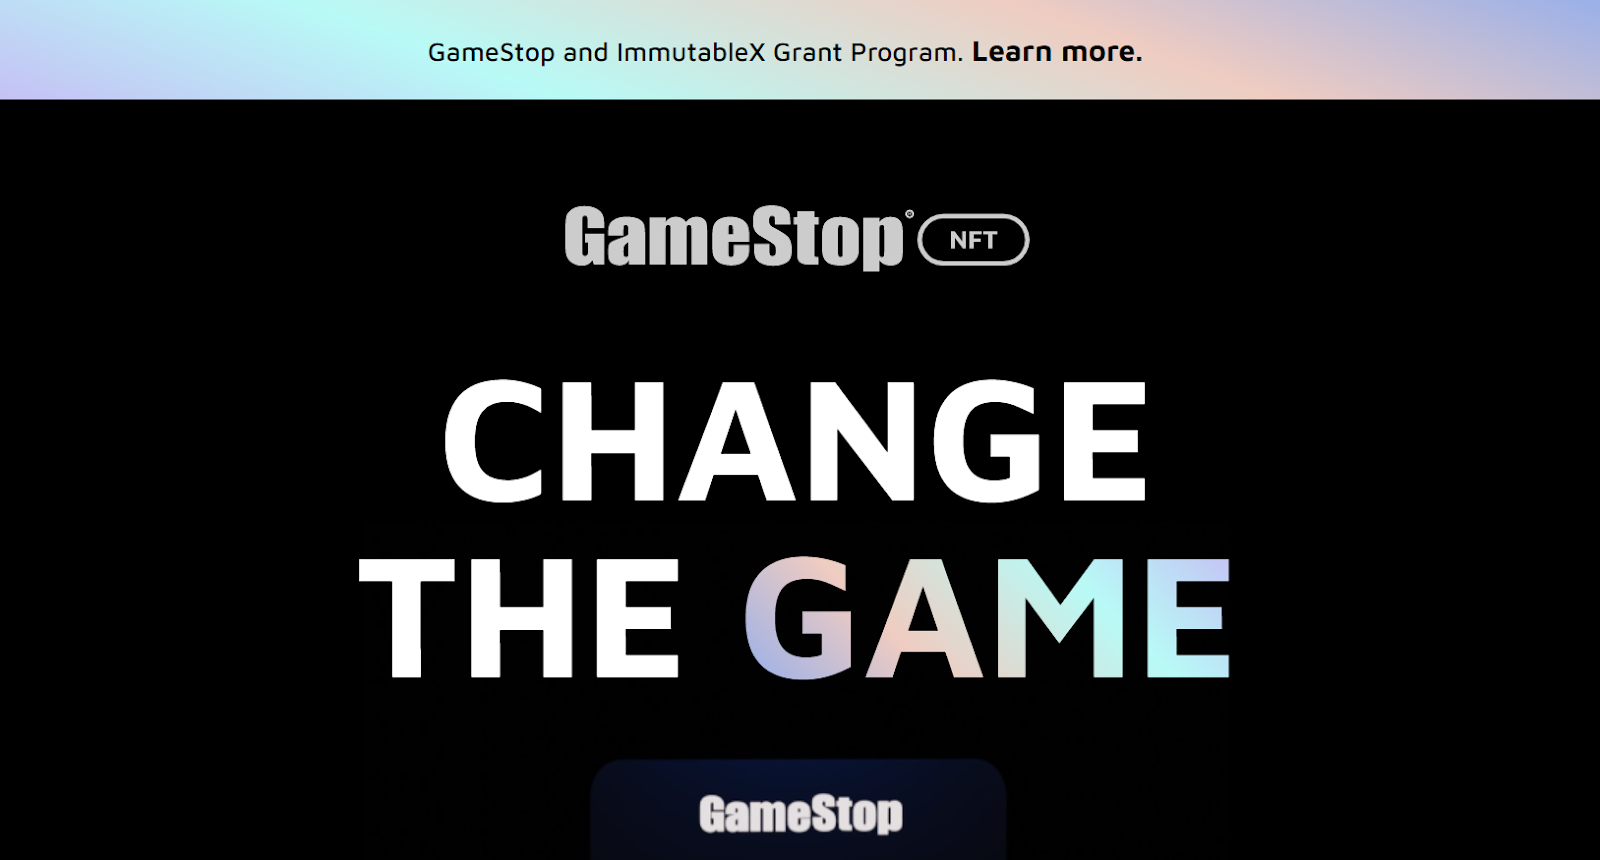 GameStop promising to change the game with NFT and Immutable X